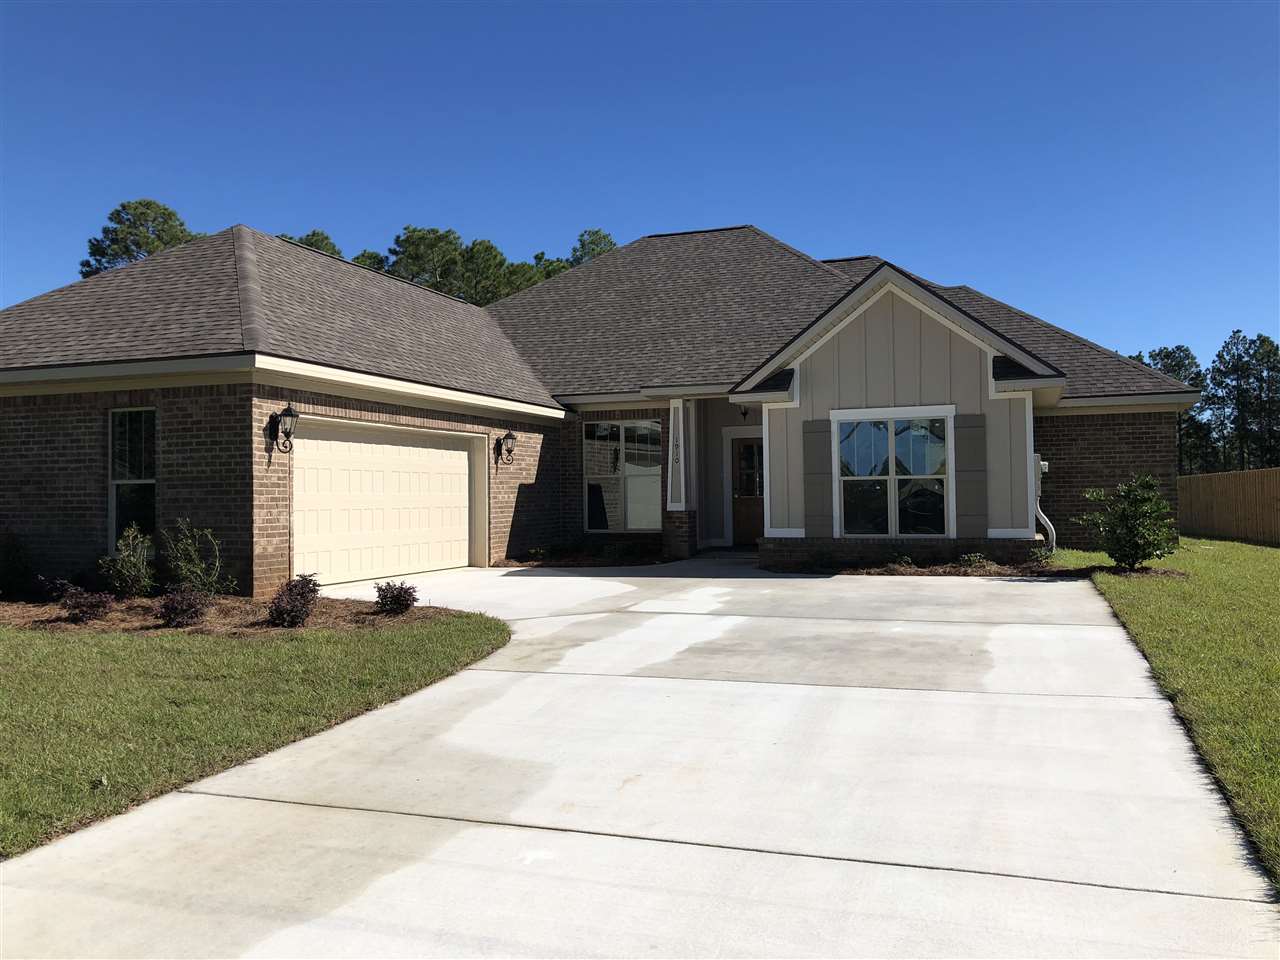 Islandwood home for sale - Gulf Shores